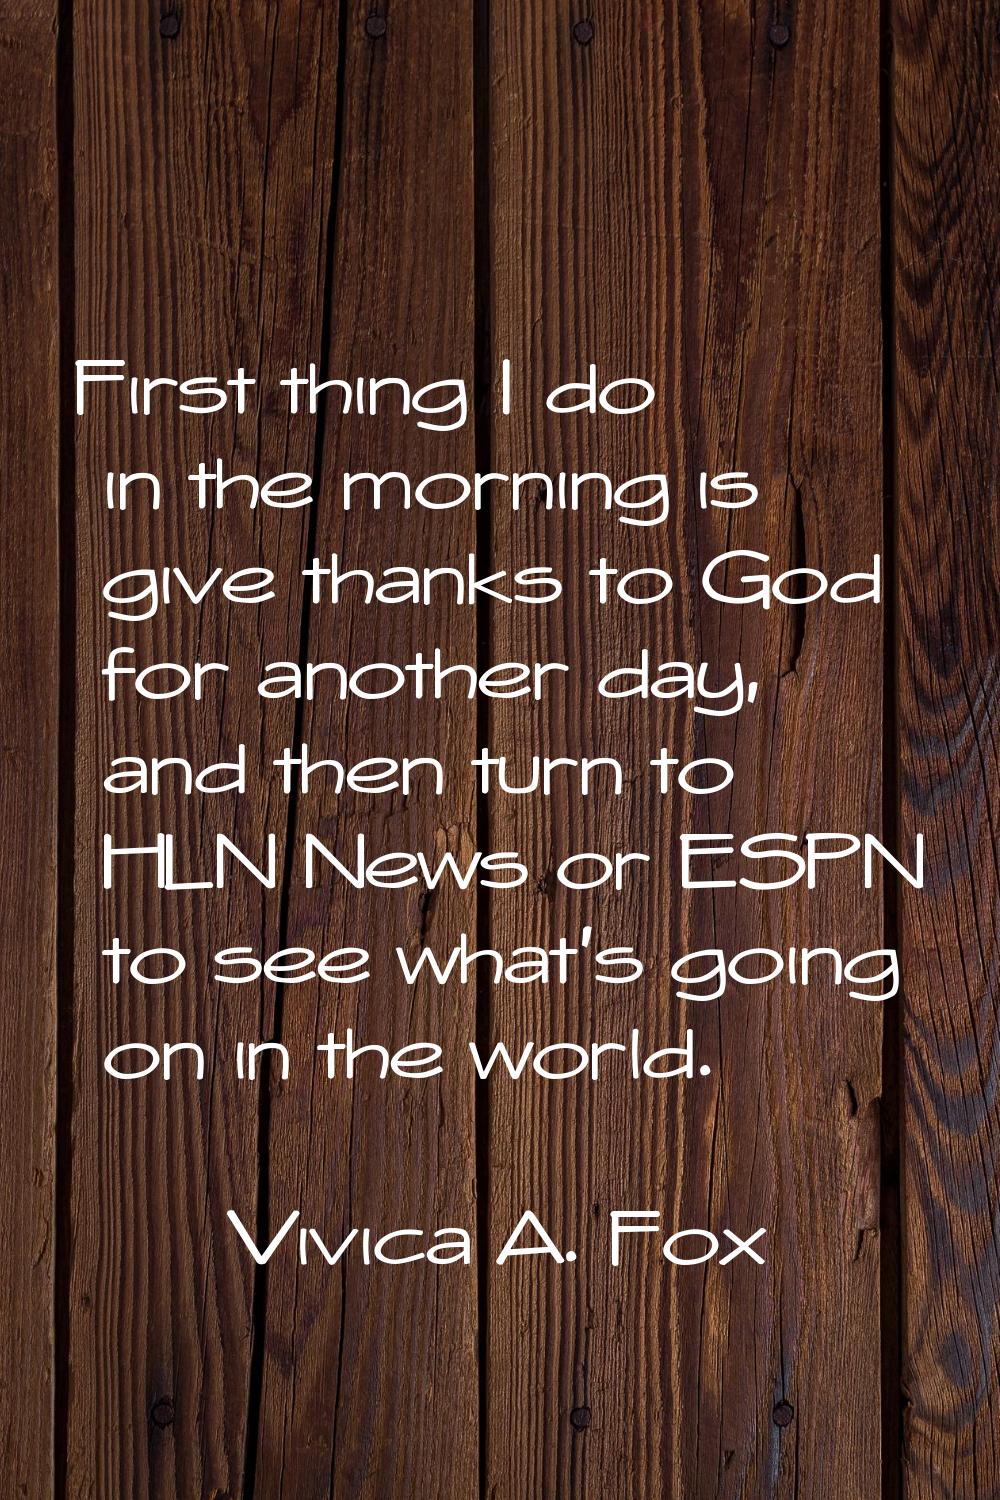 First thing I do in the morning is give thanks to God for another day, and then turn to HLN News or